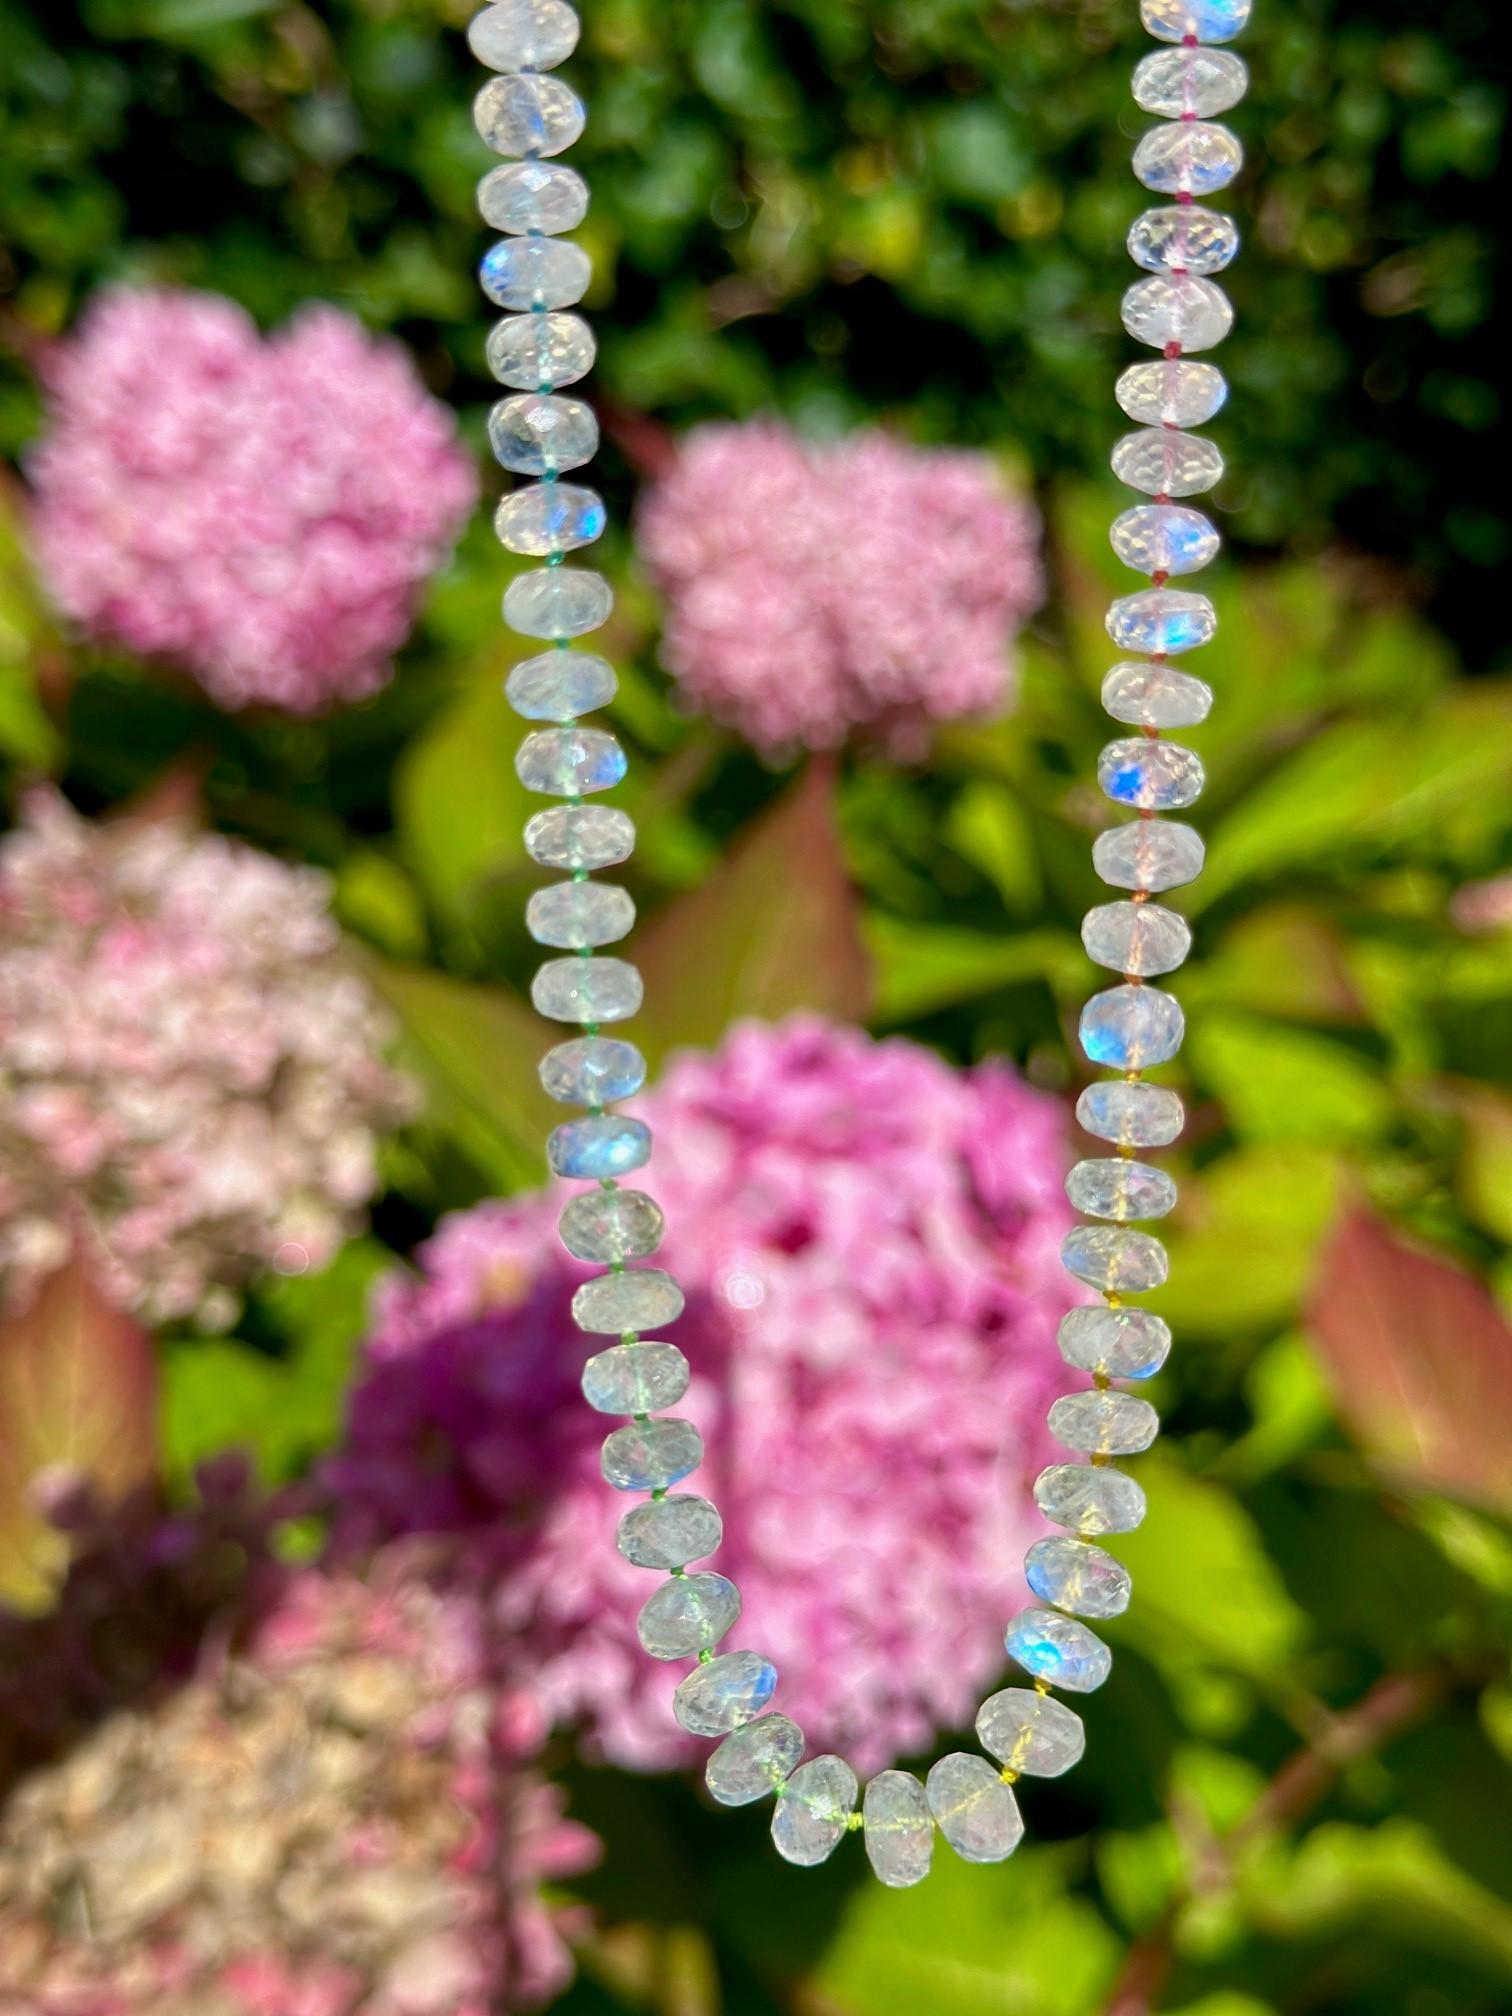 
A one of a kind sparkling rainbow moonstone necklace that reflects all the hues of the rainbow spectrum. 

All 85 hand carved rainbow moonstone beads are carefully selected and methiciously hand knotted on multicolor silk to compose a timeless